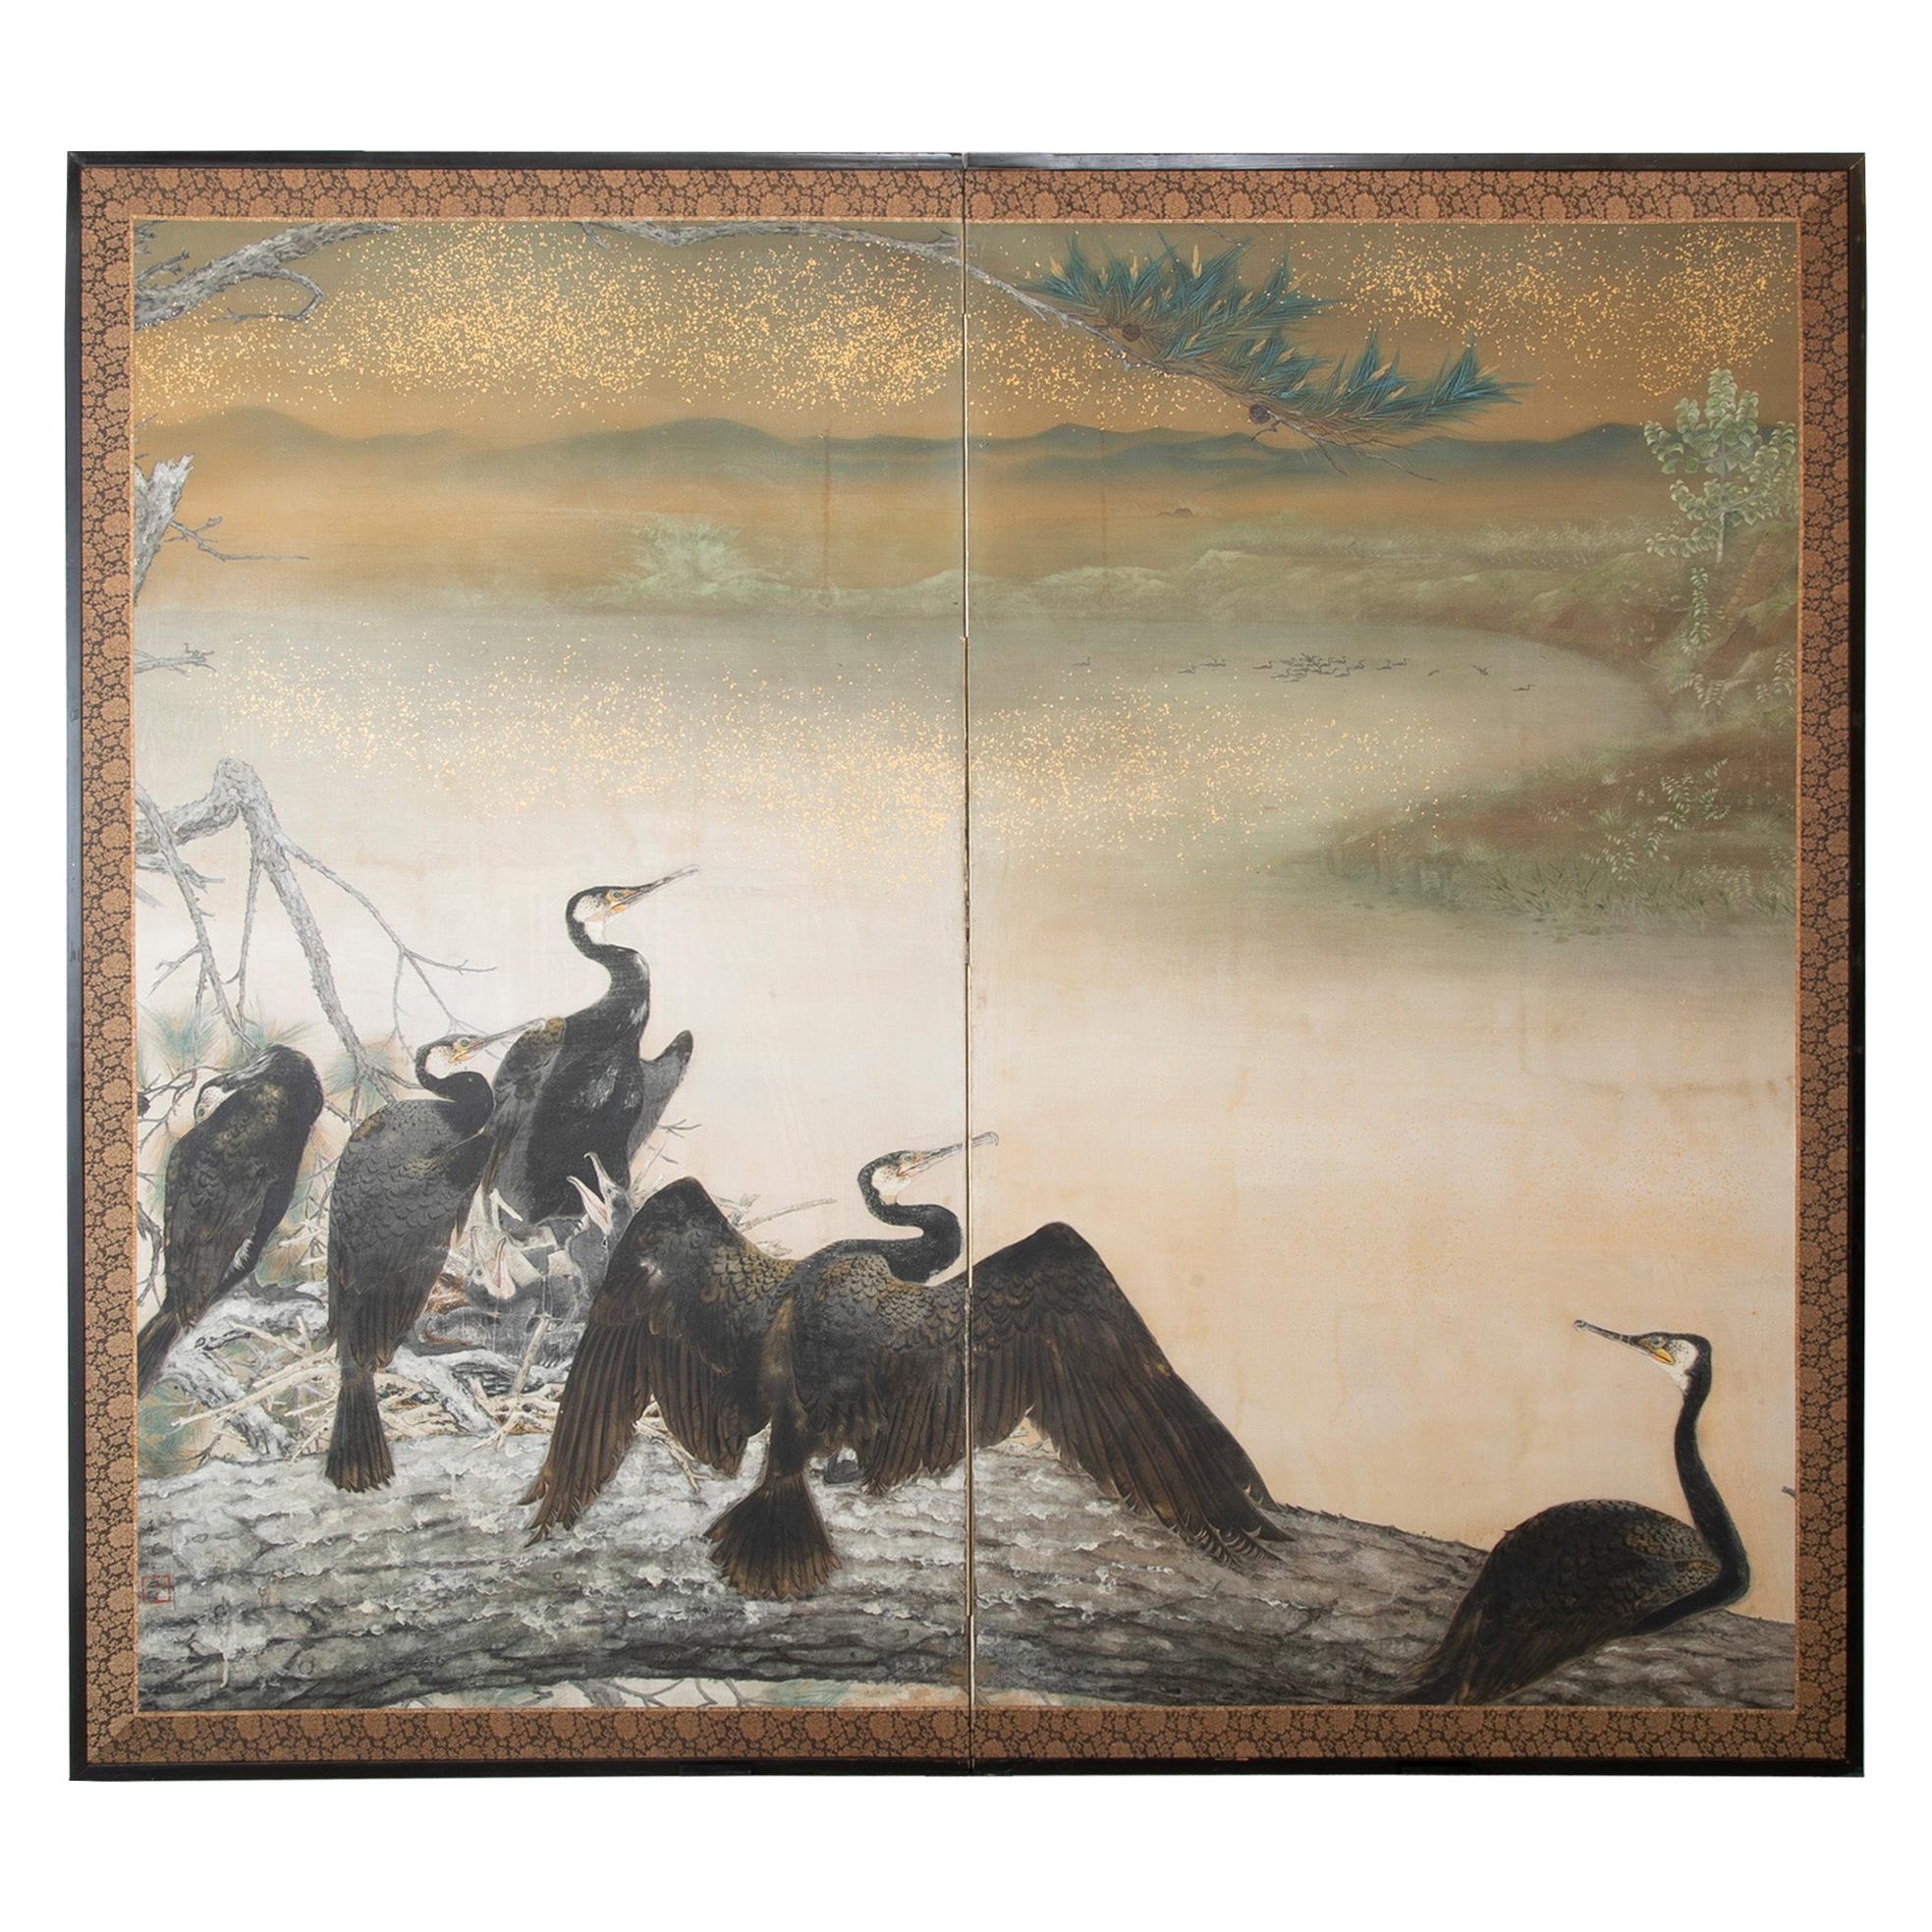 Taisho Period Painted Silk Screen Depicting Nesting Cormorants by Asami Joujou For Sale